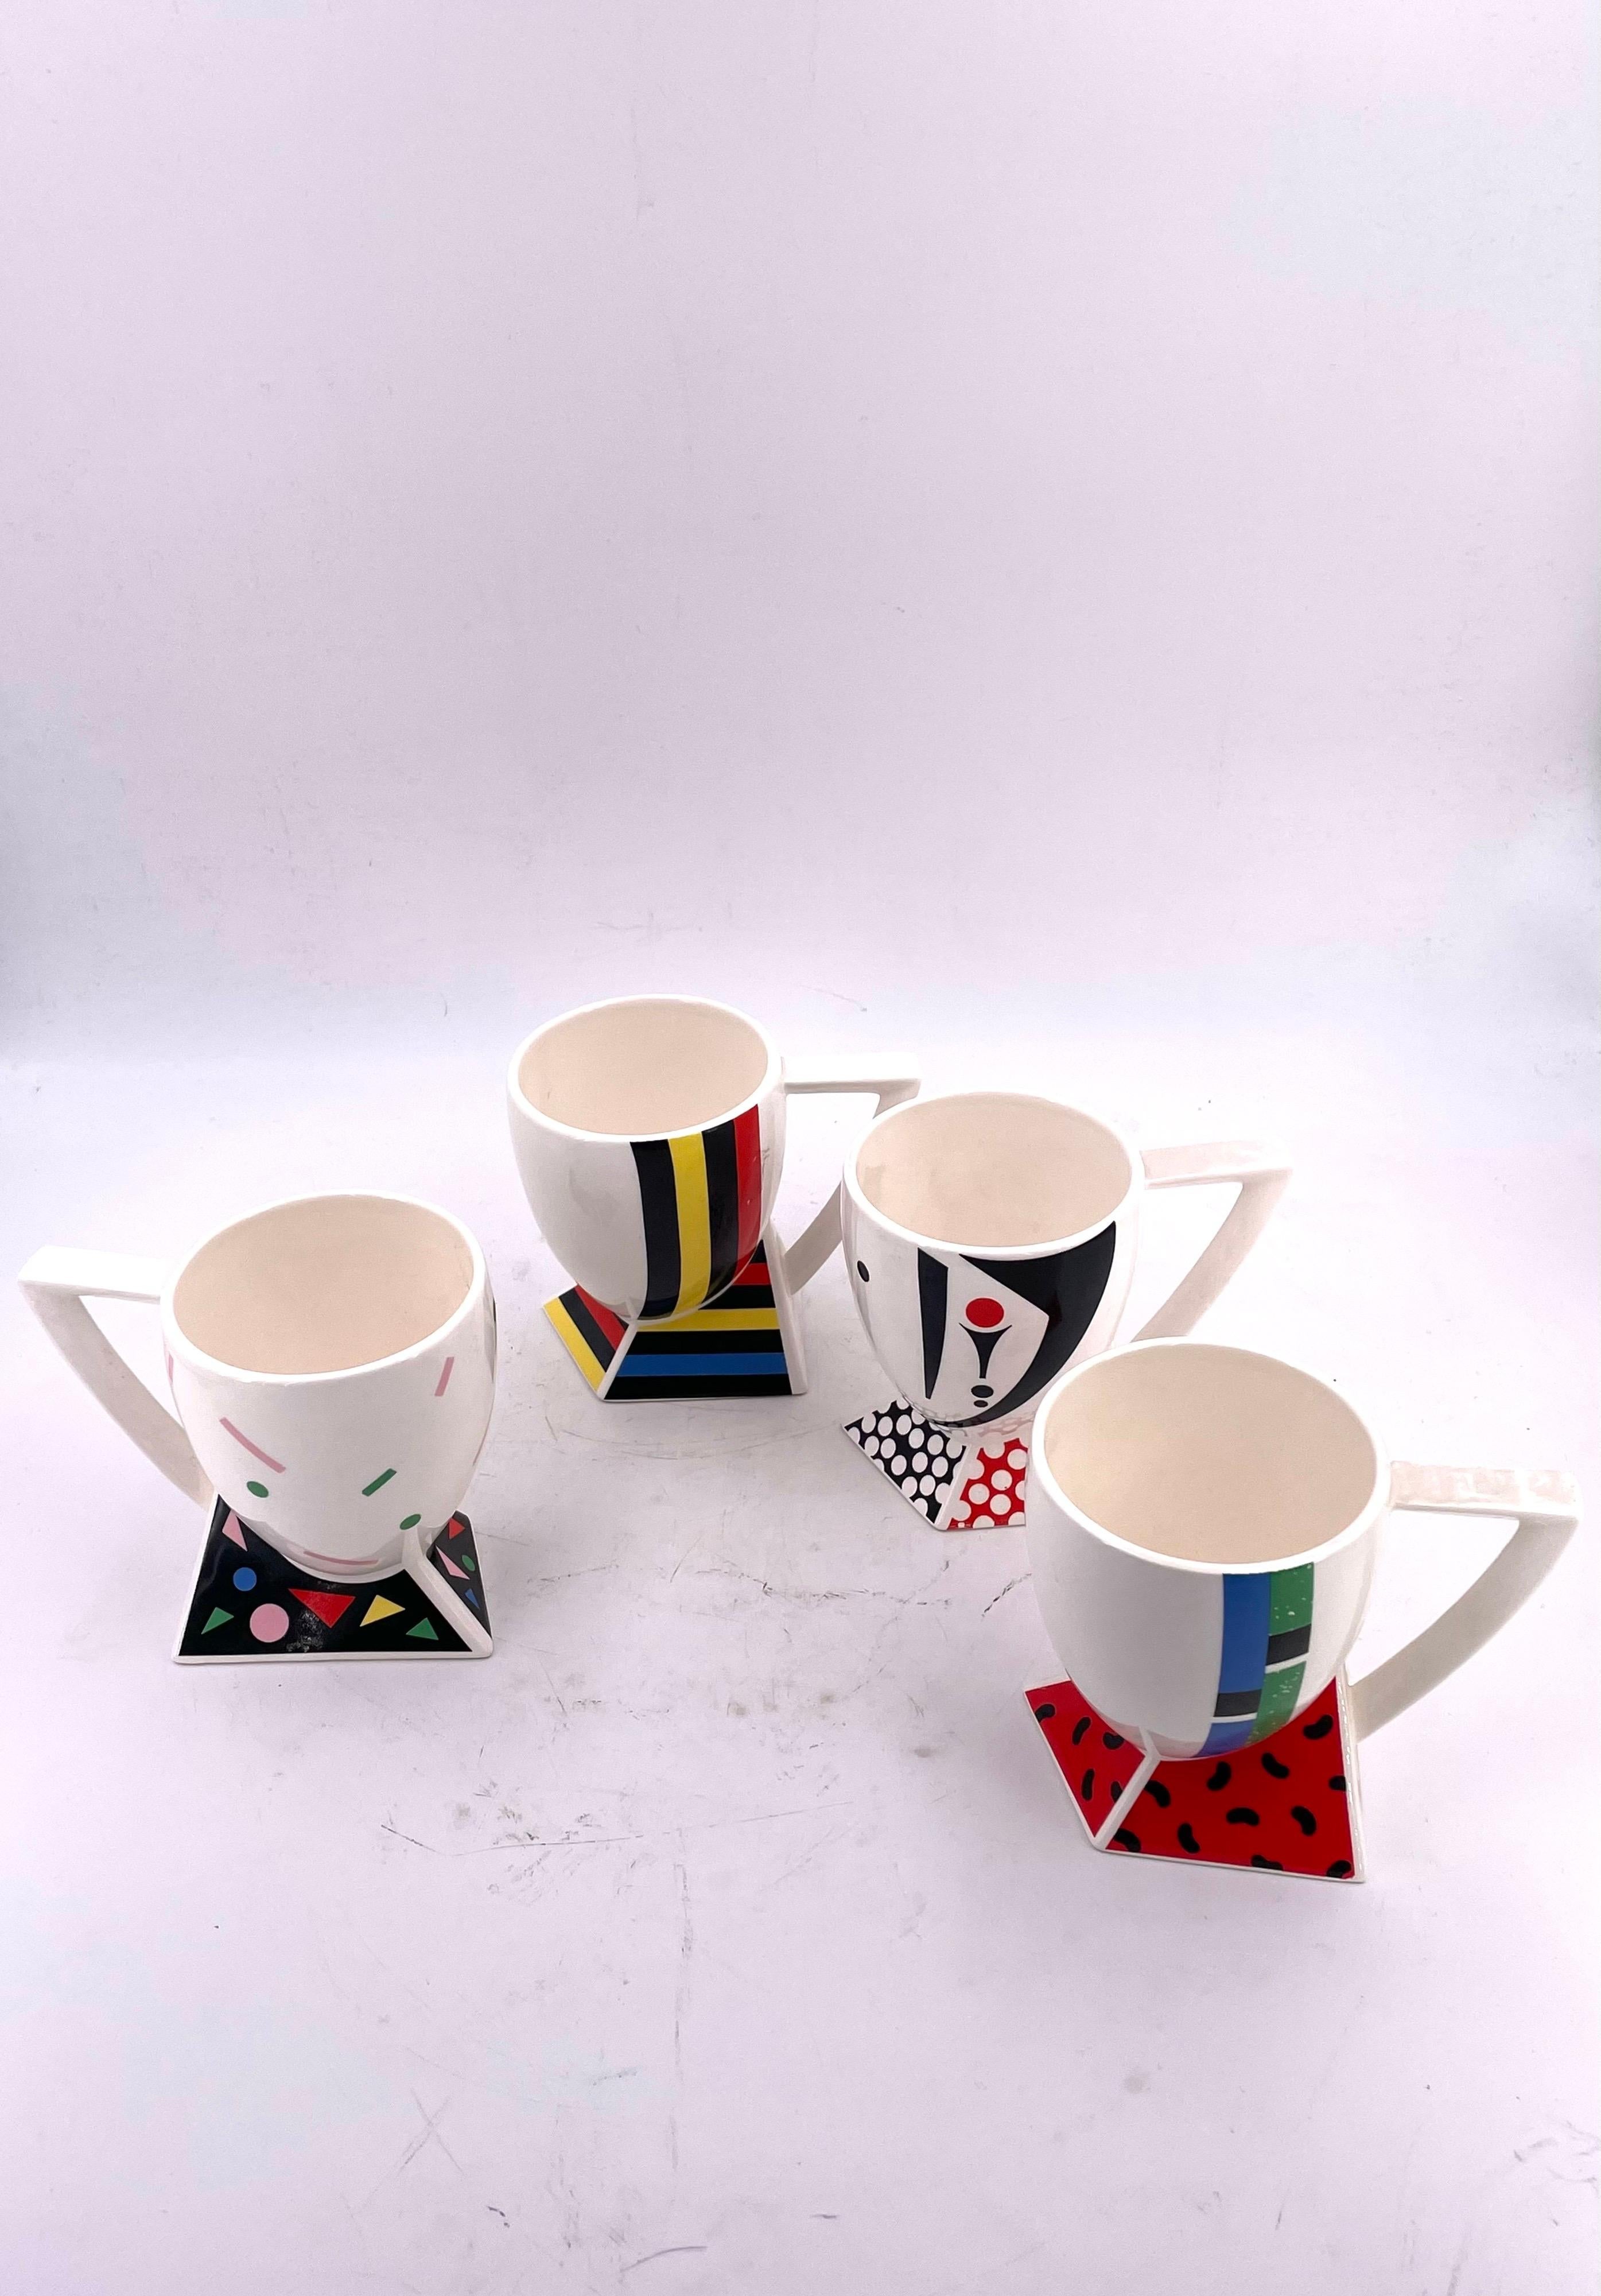 Great and rare set of 4 cups designed by Kato Kogei, Japan Alpha - 3 Fujimori Collection, great condition never used circa 1980s, Memphis.